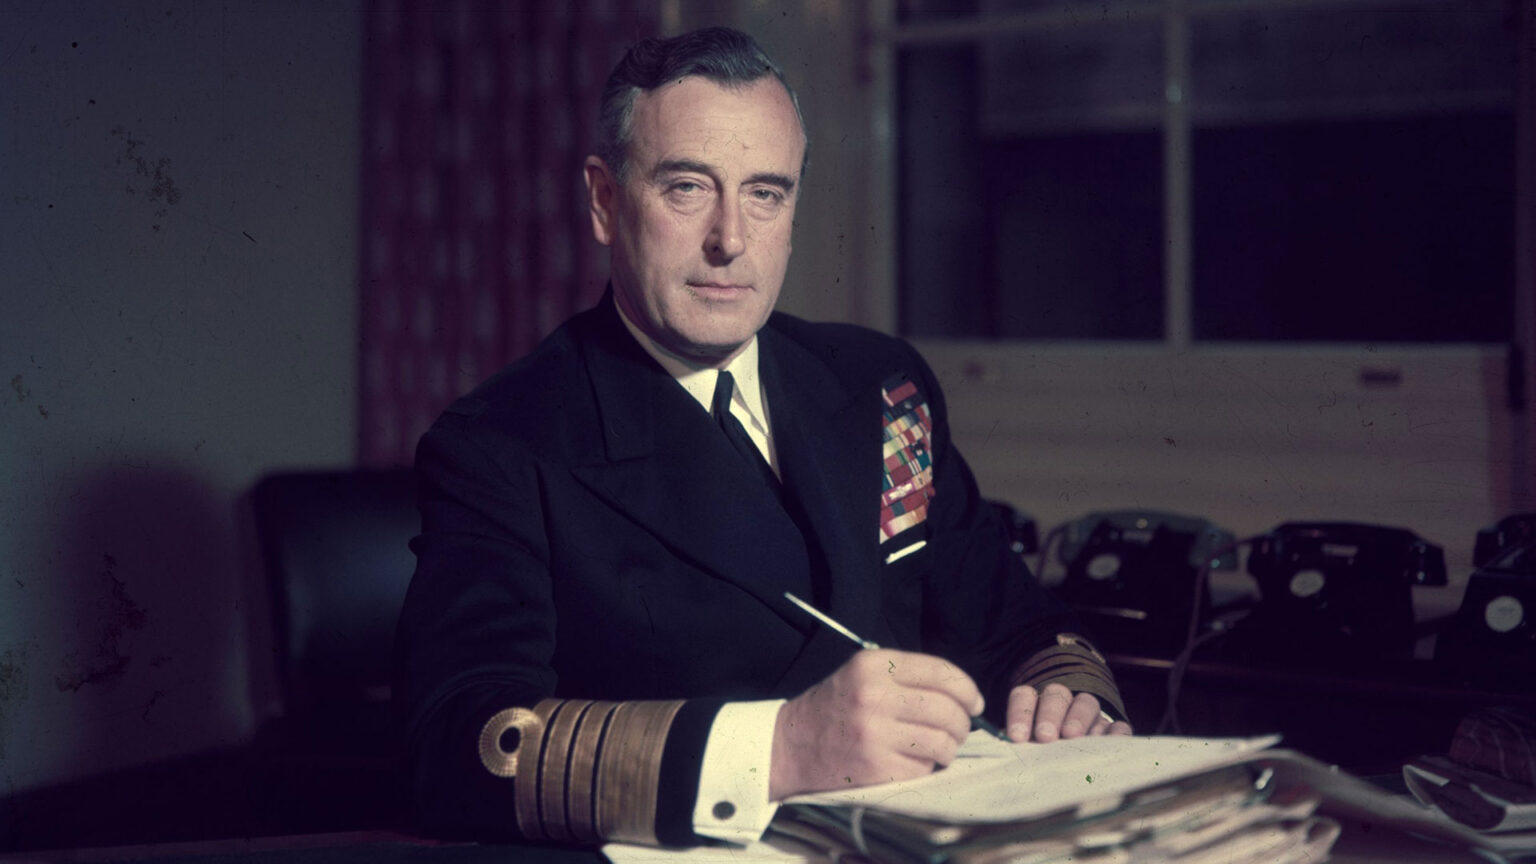 The King’s great uncle Lord Mountbatten accused of abusing boy in 1970s